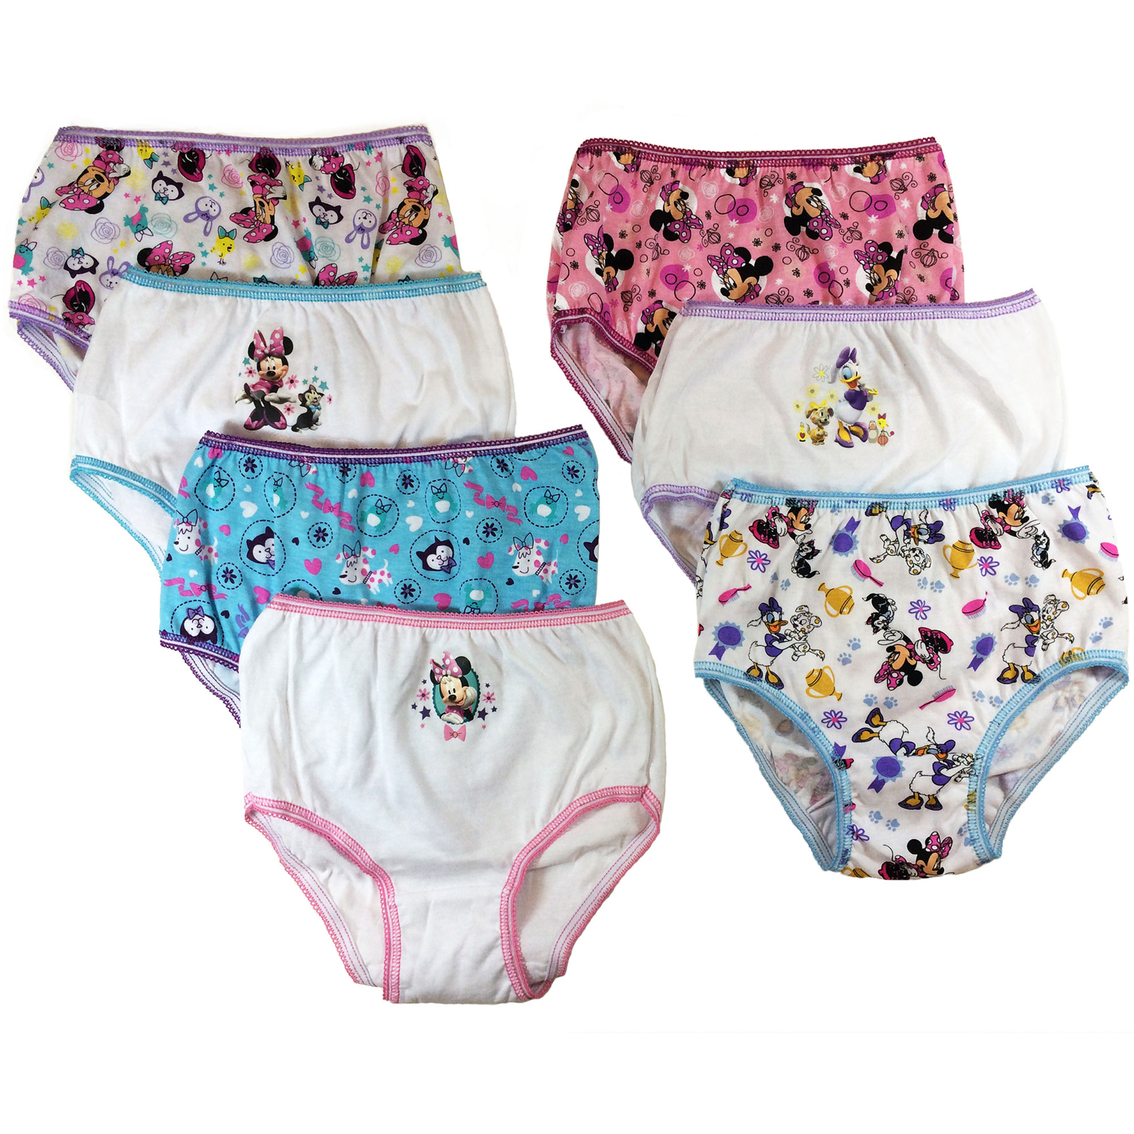 Disney Minnie Mouse And Daisy Duck Toddler Girls Underwear 7 Pk., Toddler  Girls 2t-5t, Clothing & Accessories